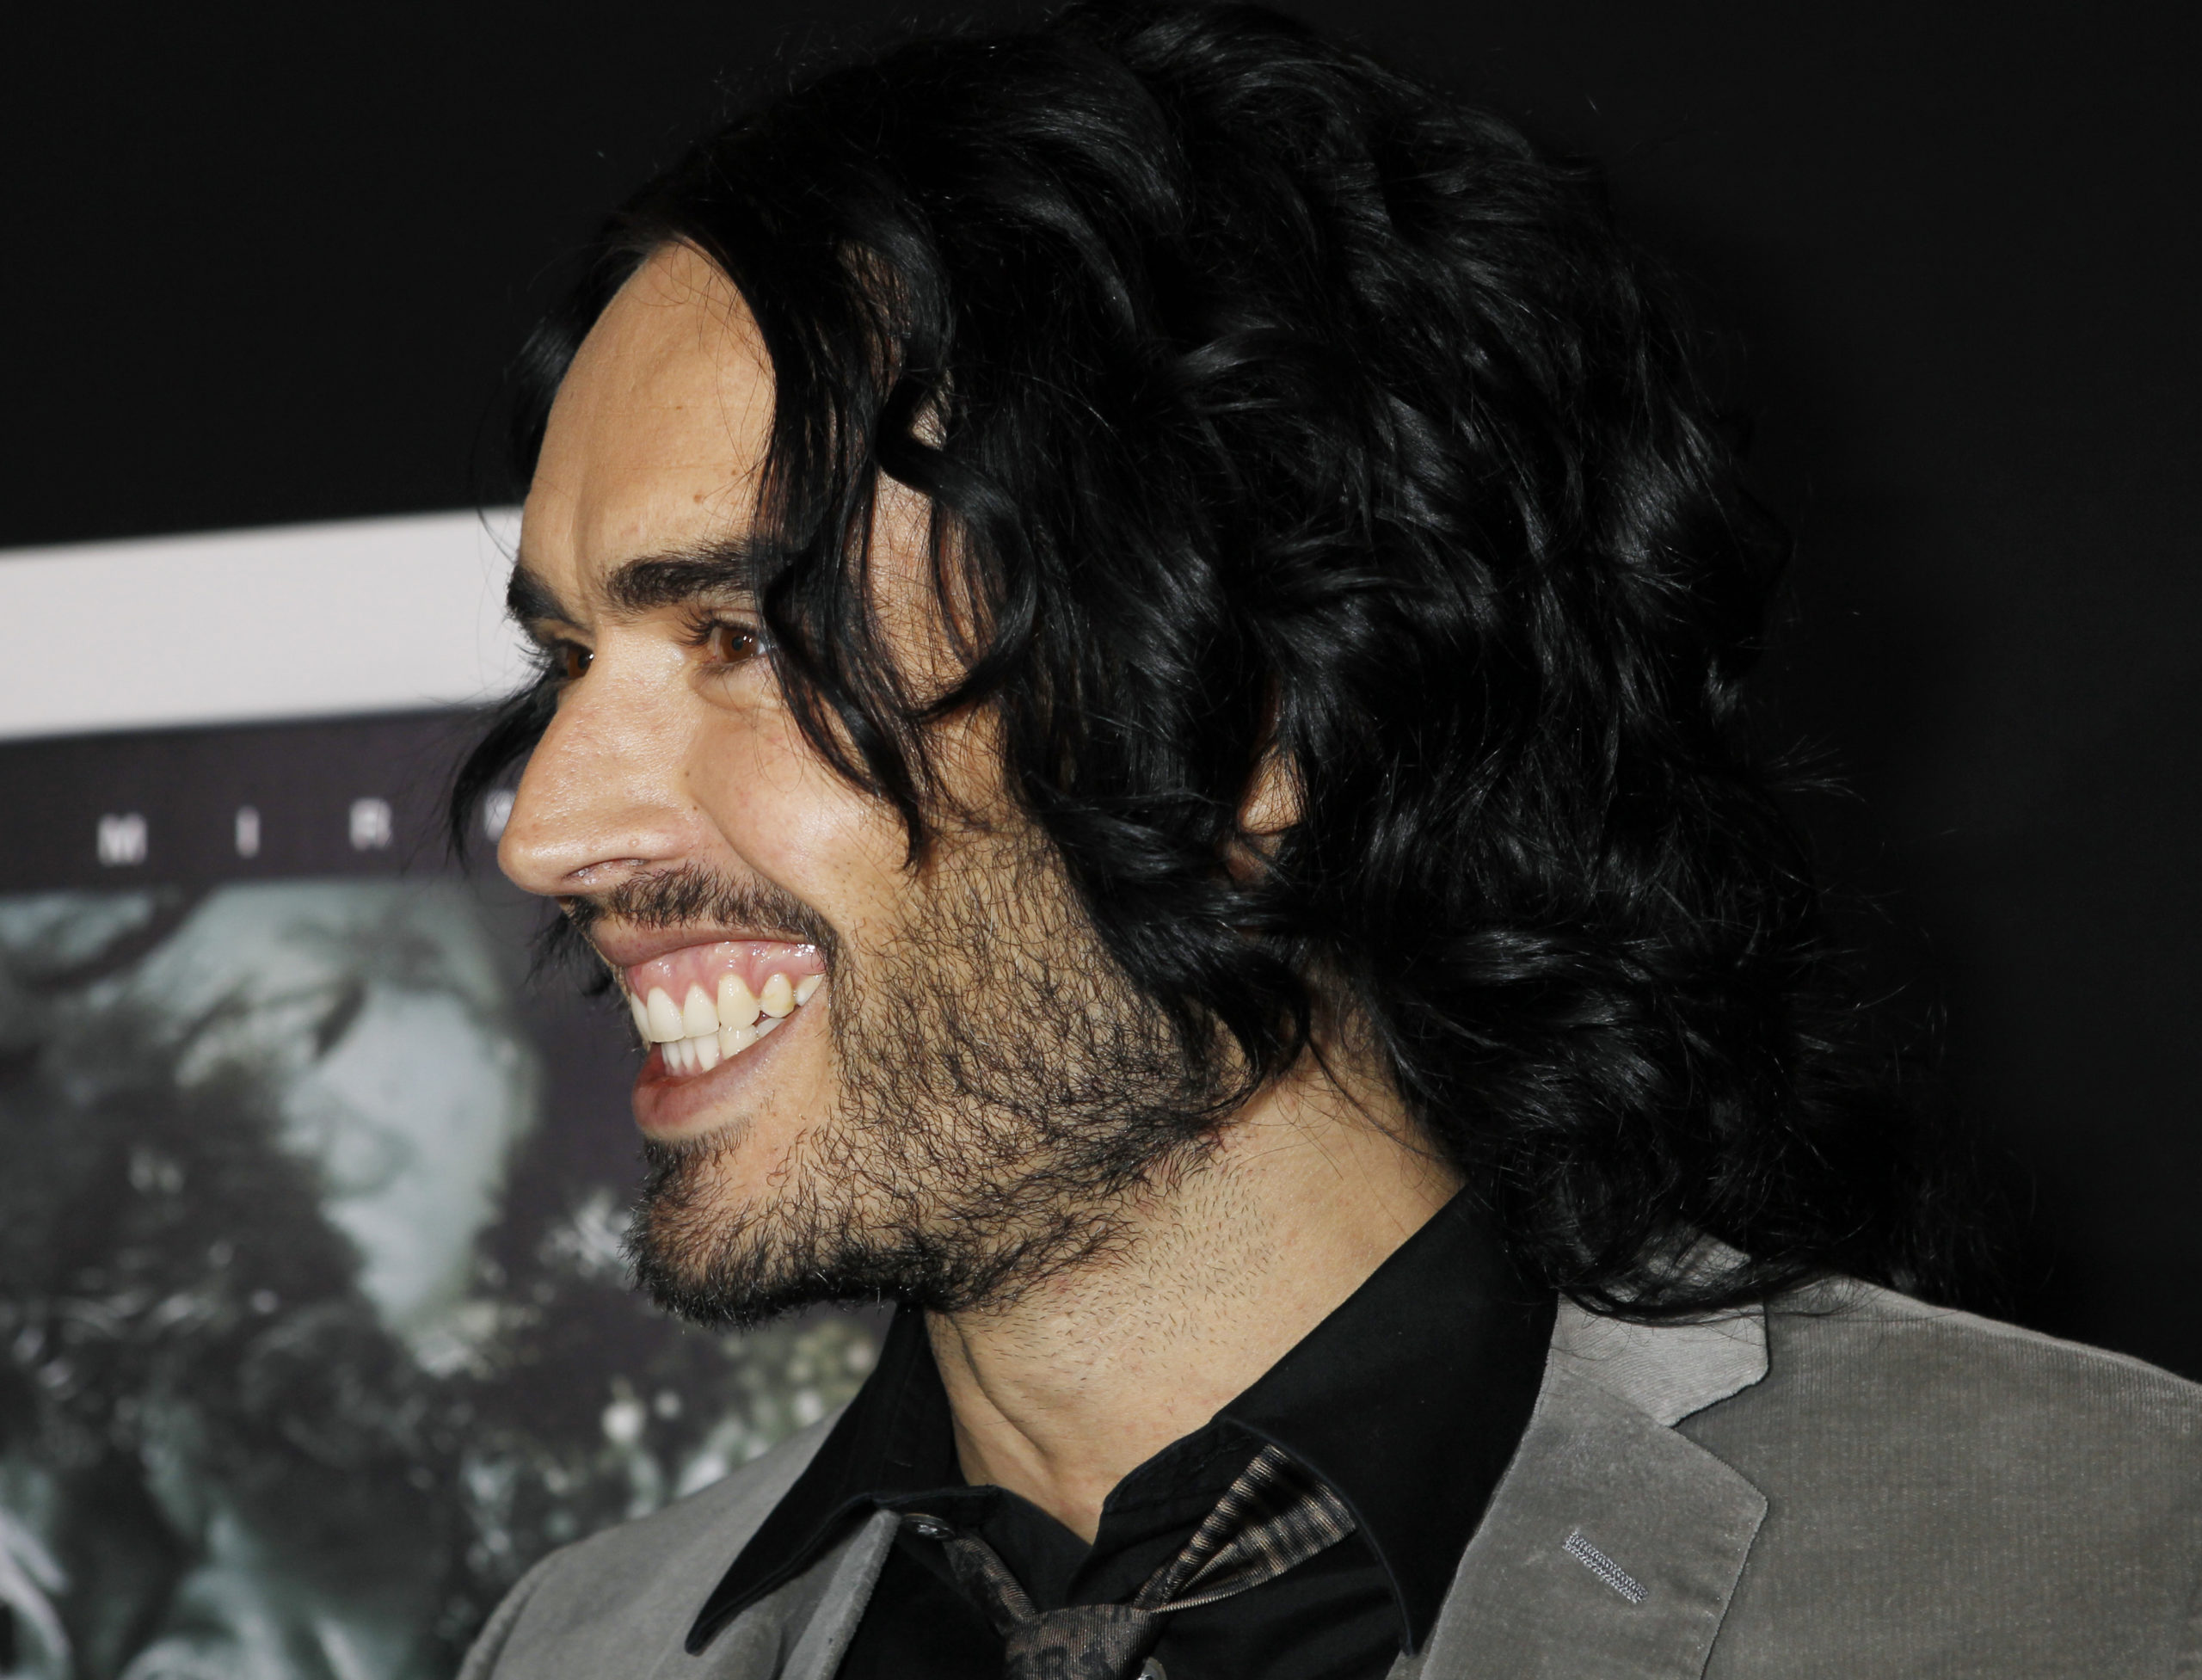 Actor Russell Brand arrives at the premiere of his film 'The Tempest' in Hollywood December 6, 2010. REUTERS/Fred Prouser (UNITED STATES - Tags: ENTERTAINMENT)